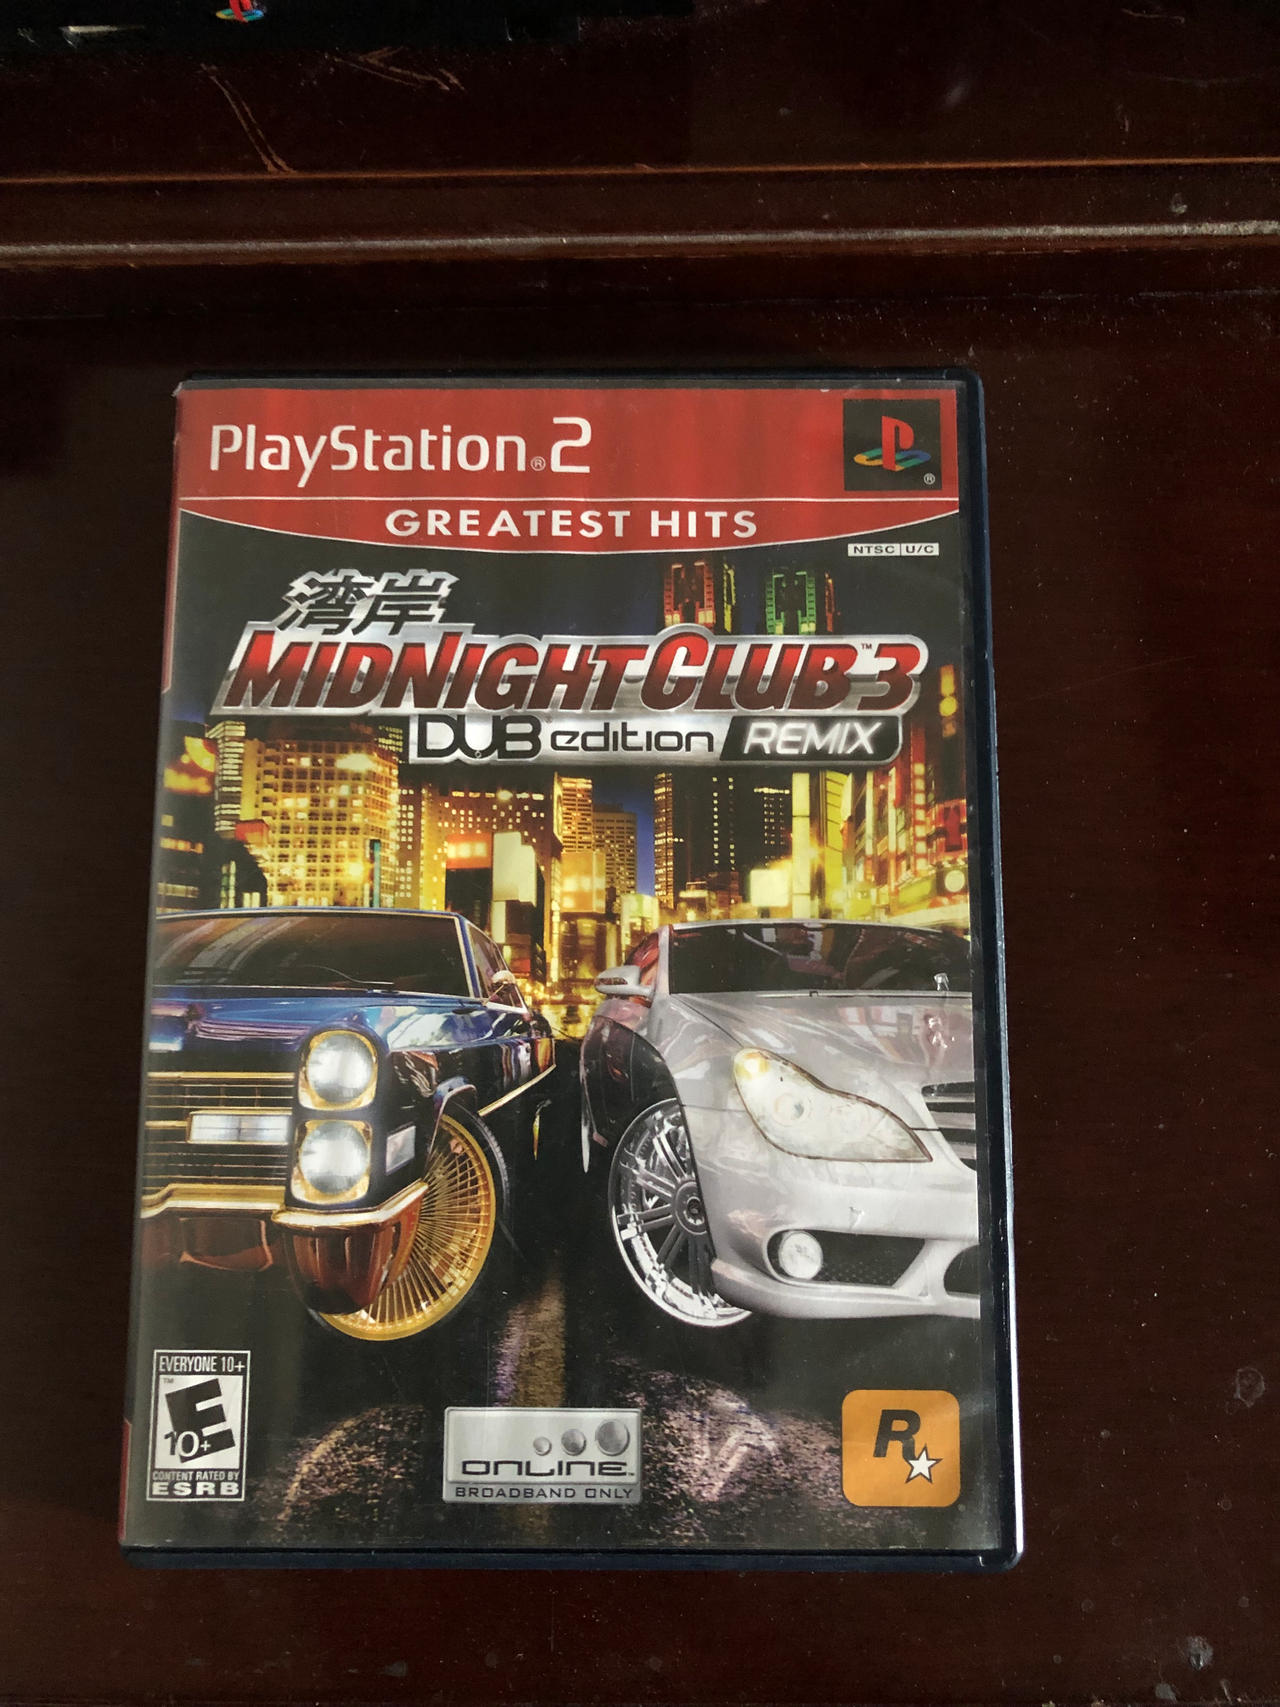 I've obtained Midnight Club 3: DUB Edition Remix. by